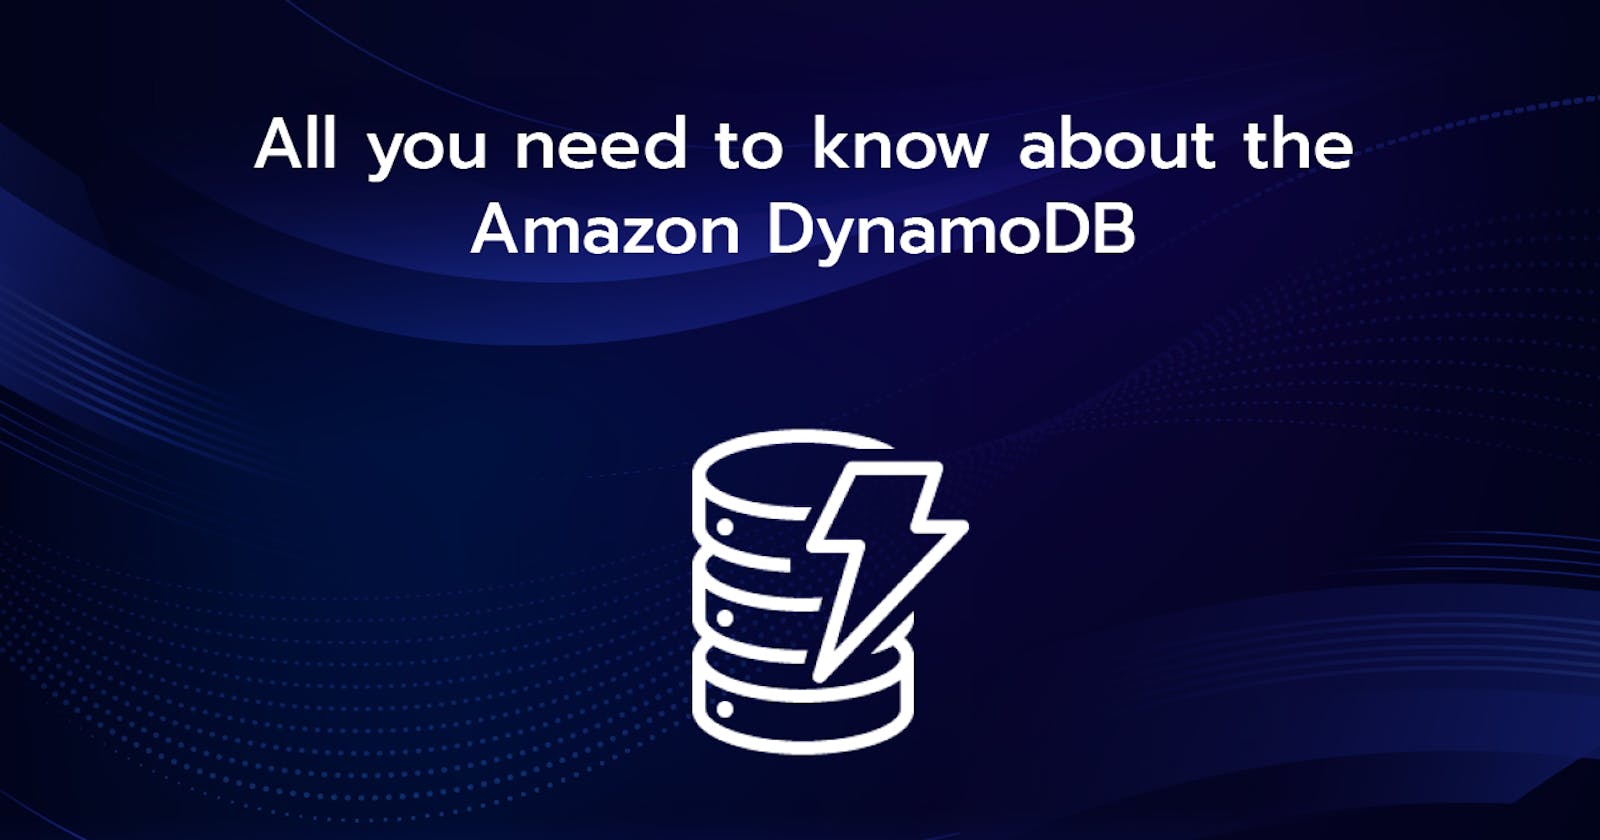 All you need to know about the Amazon DynamoDB